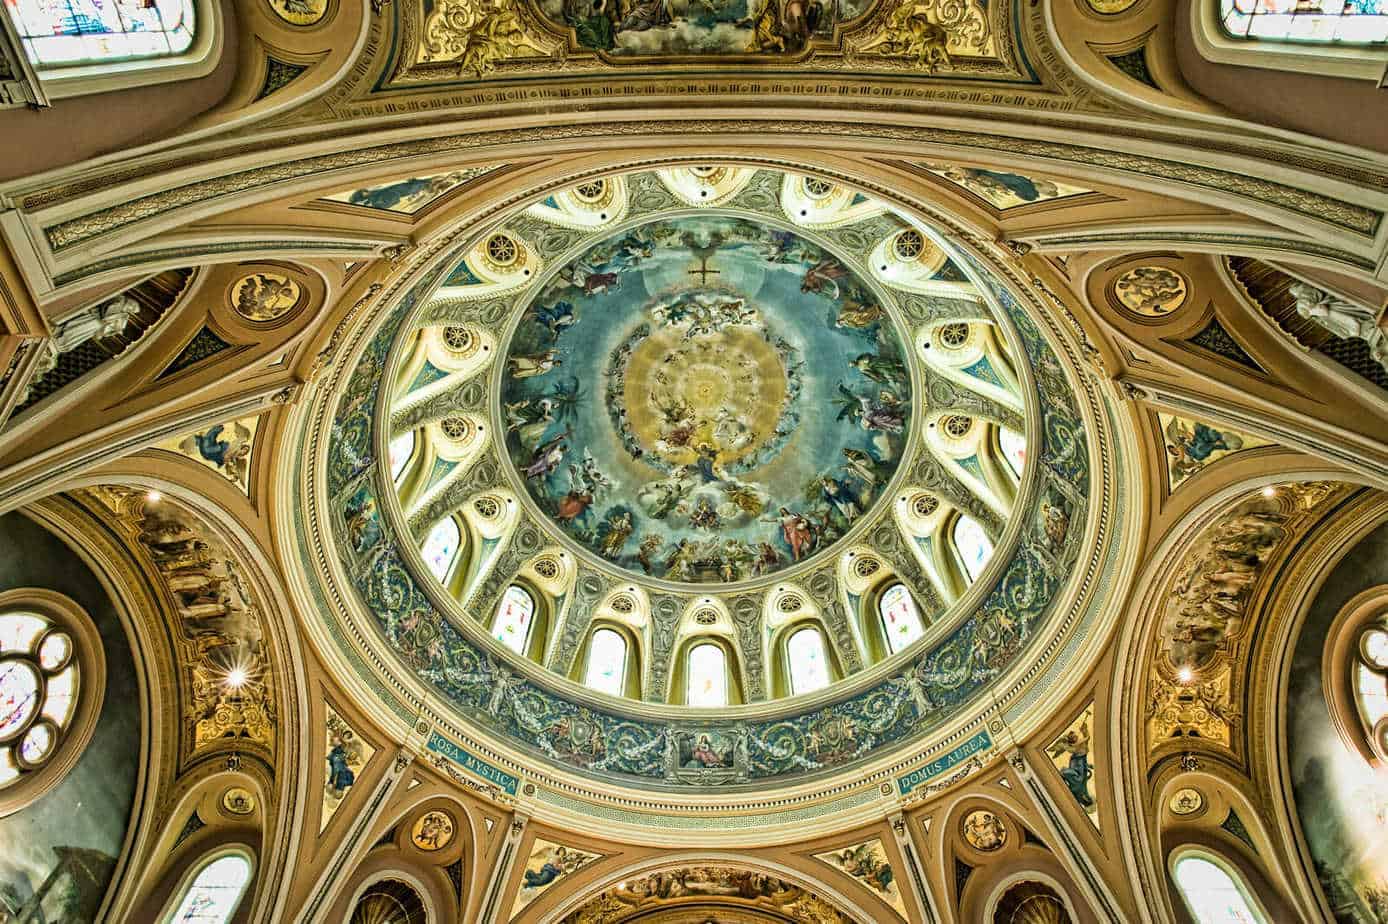 The dome of the Basilica of Our Lady of Victories in Buffalo, N.Y.